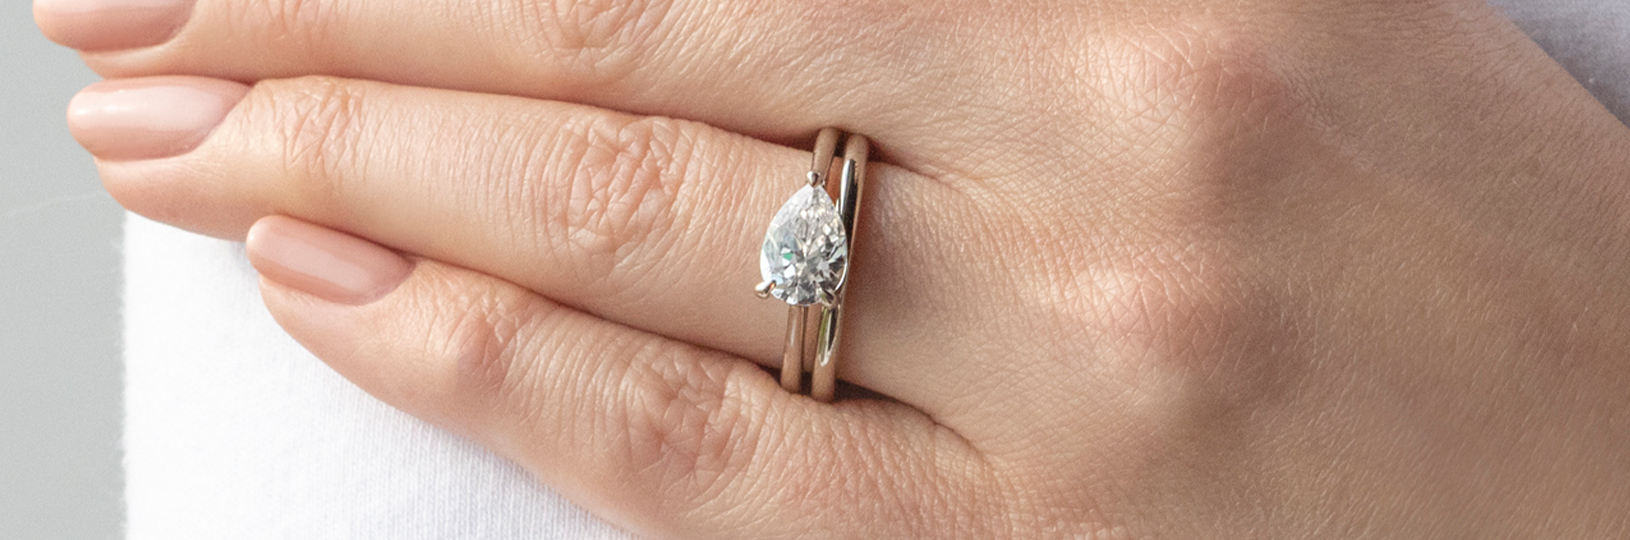 East-west solitaire engagement ring set.